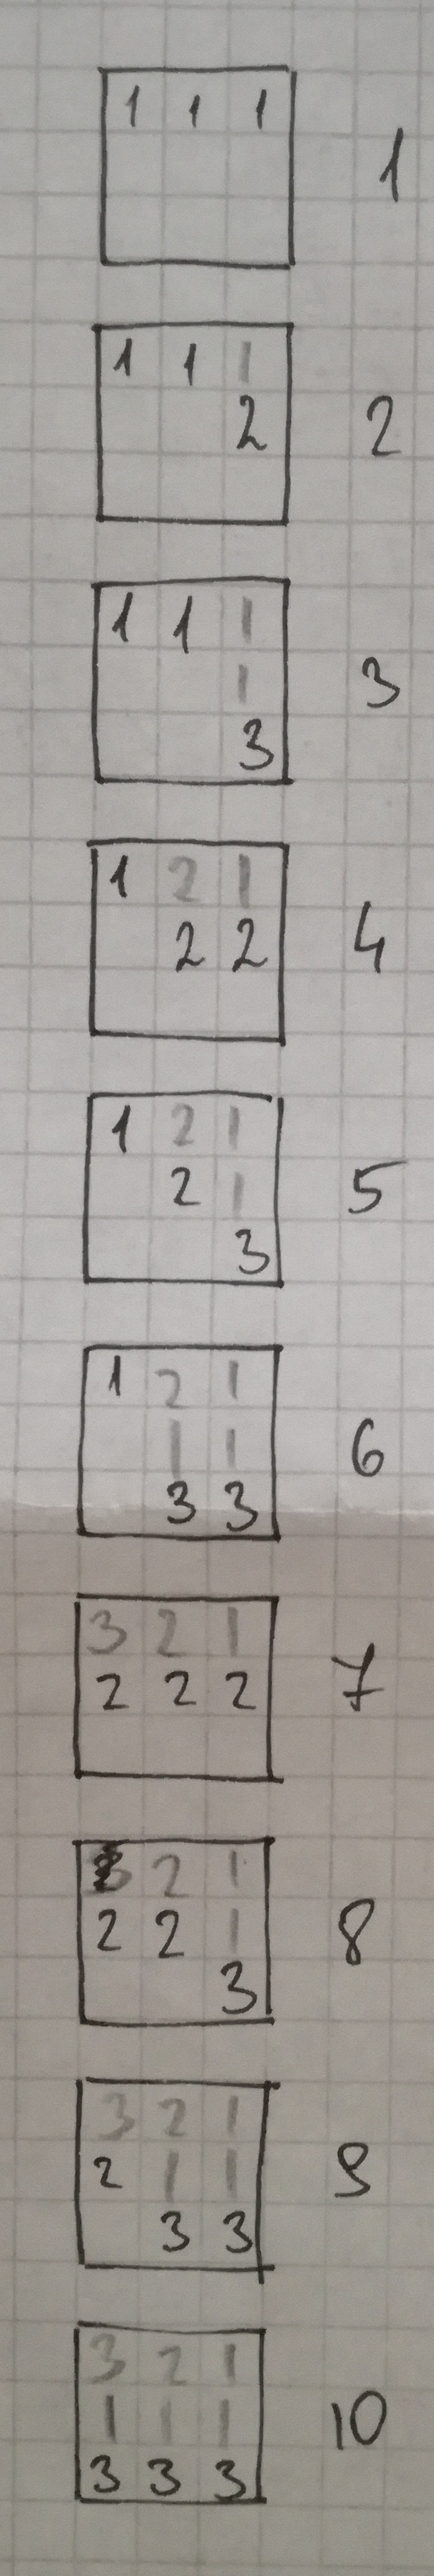 n=3, r=3 combinations with repetition